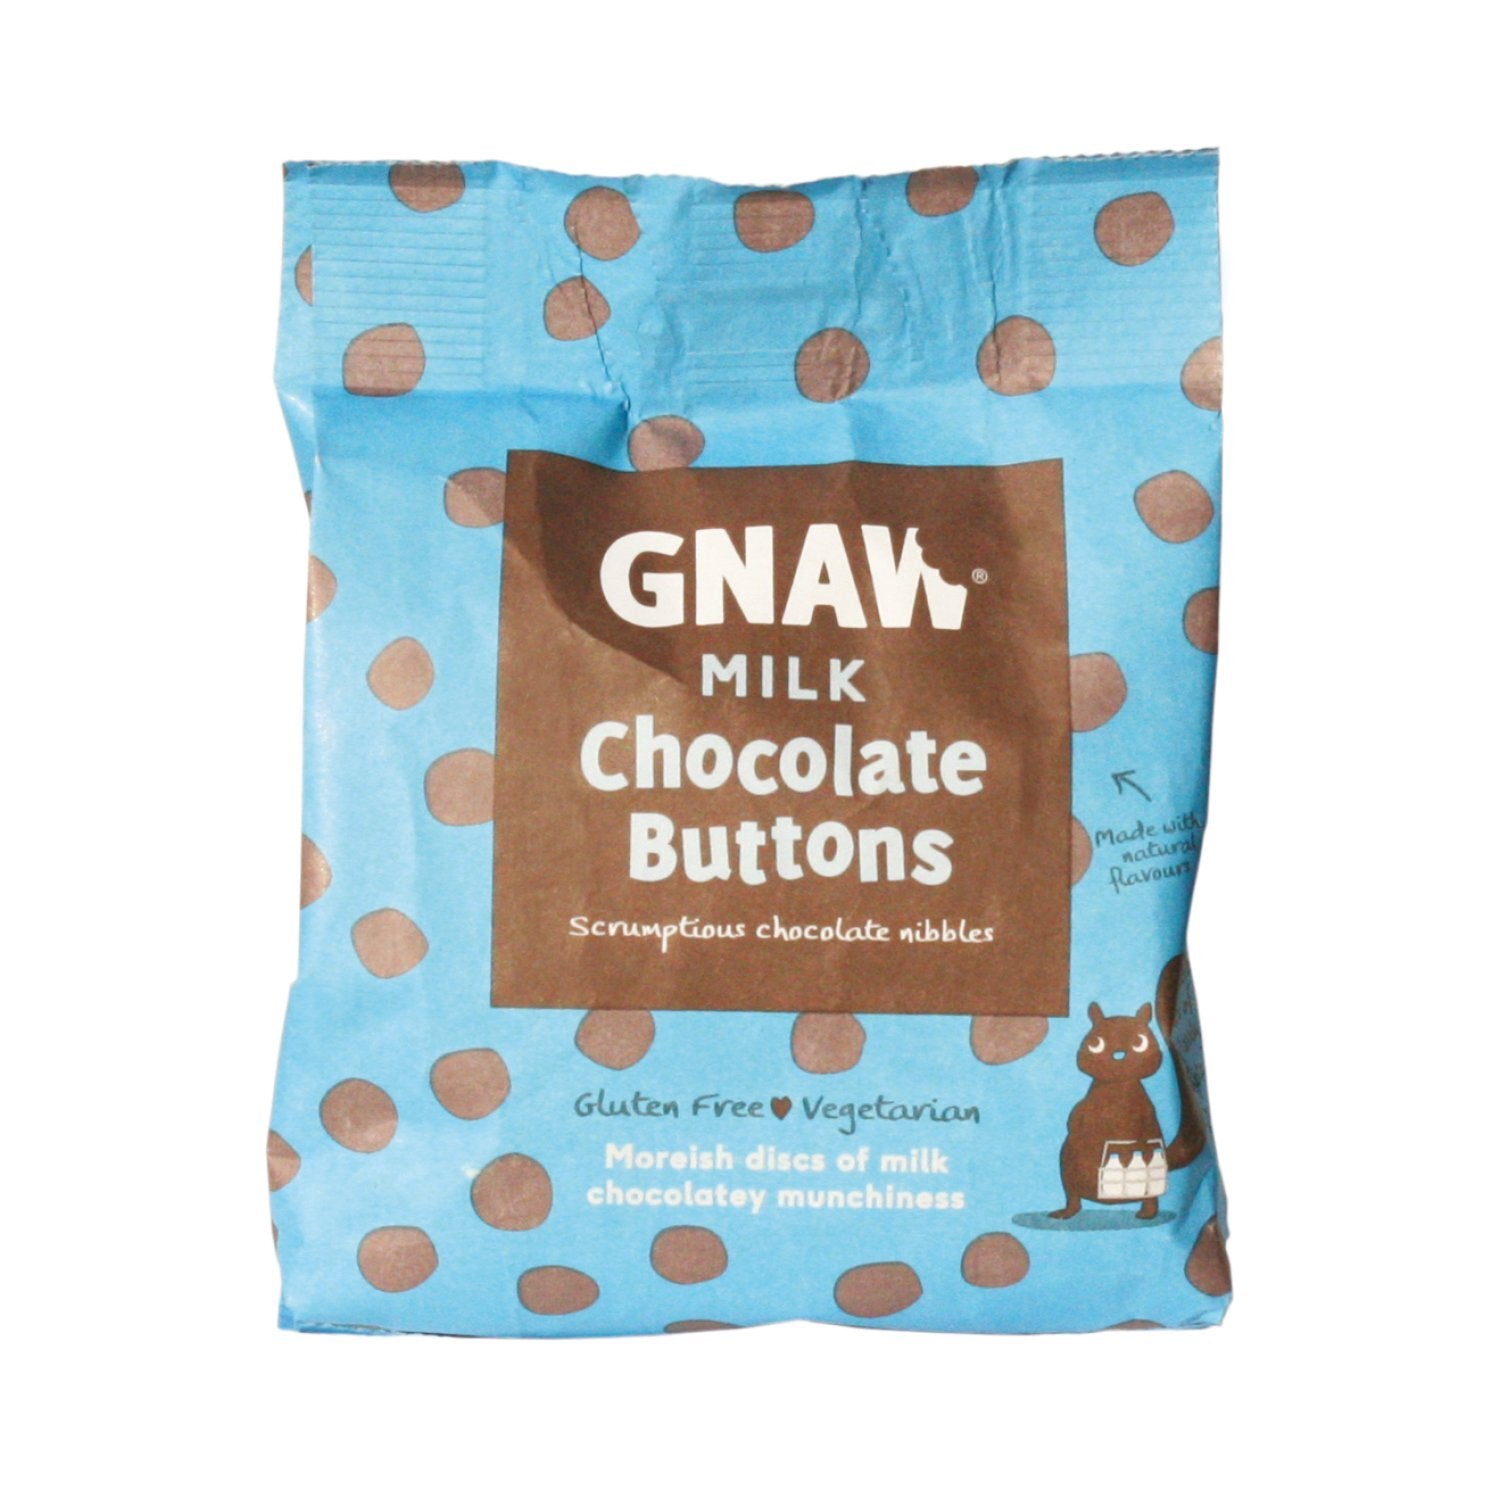 Gnaw Milk Chocolate Buttons - 150g